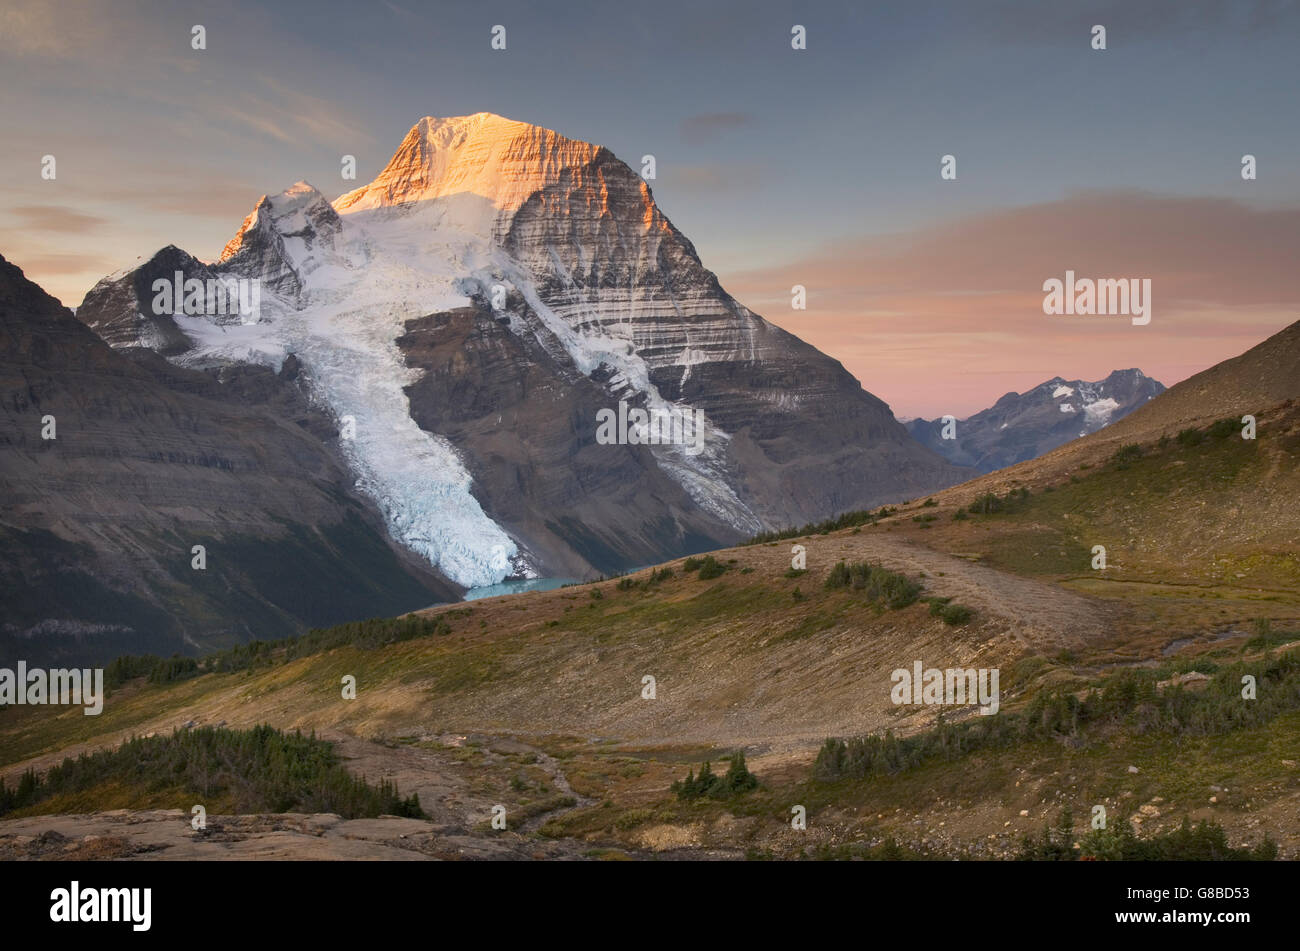 Sunrise over Mount Robson, highest mountain in the Canadian Rockies, elevation 3,954 m (12,972 ft), seen from Mumm Basin Stock Photo